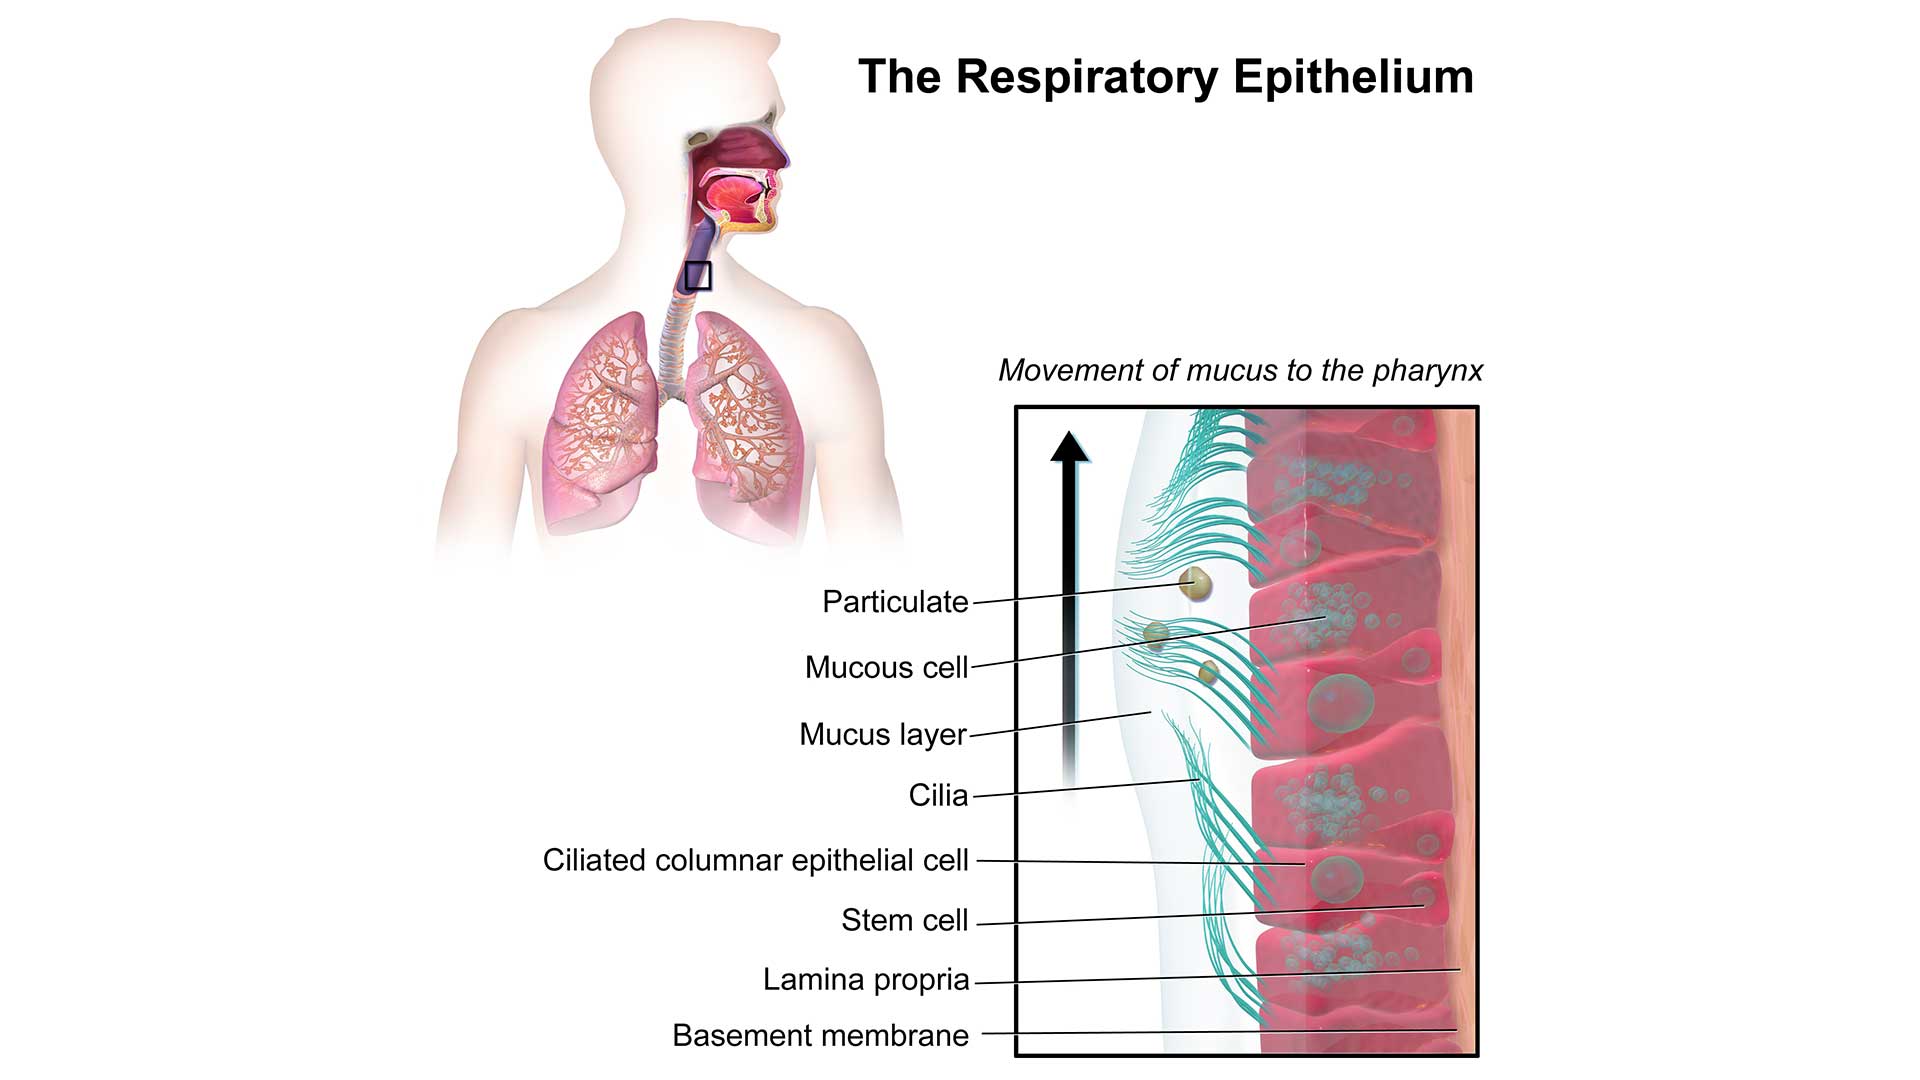 An international research team has discovered a new cell state in embryonic airway development that has been overlooked until now. It could pave the way for new approaches to treating chronic respiratory diseases and holds promise for new airway biology therapies.